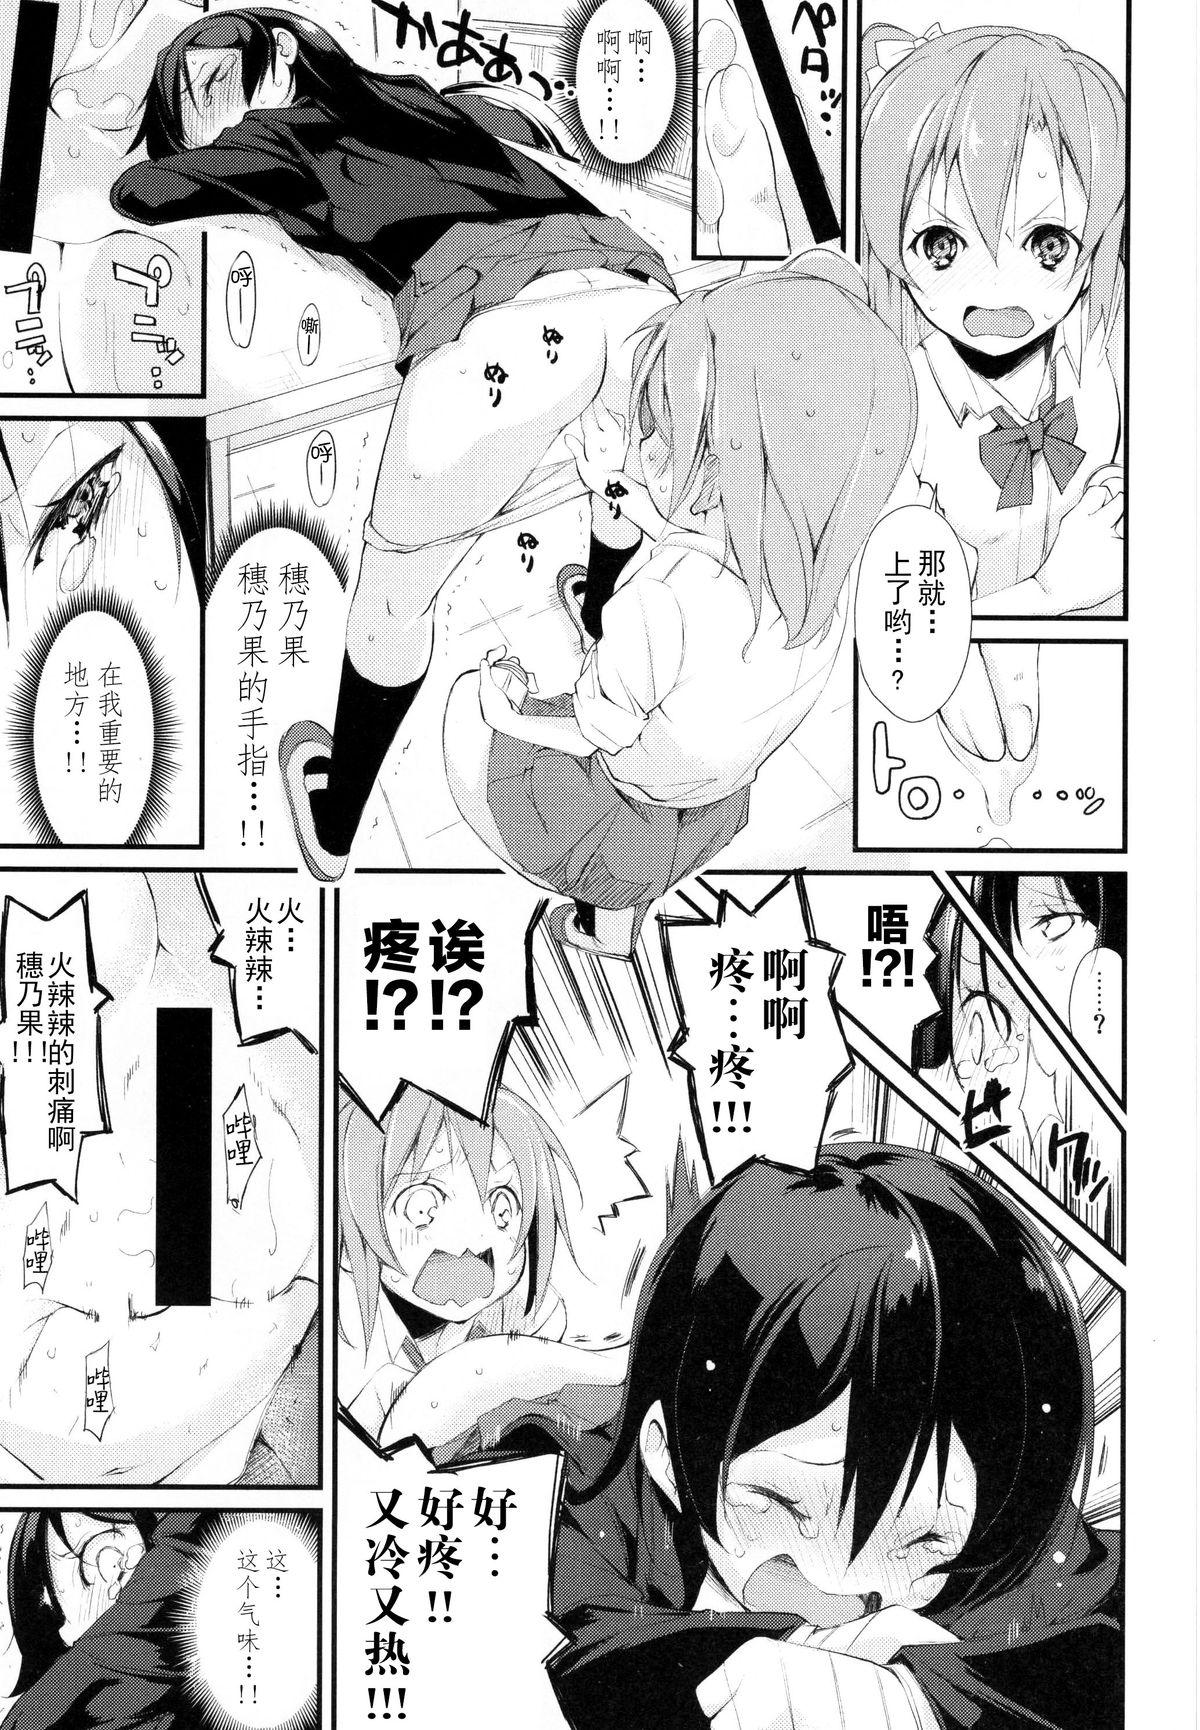 Eating Pussy SonoMan Rhapsody! - Love live Female - Page 11